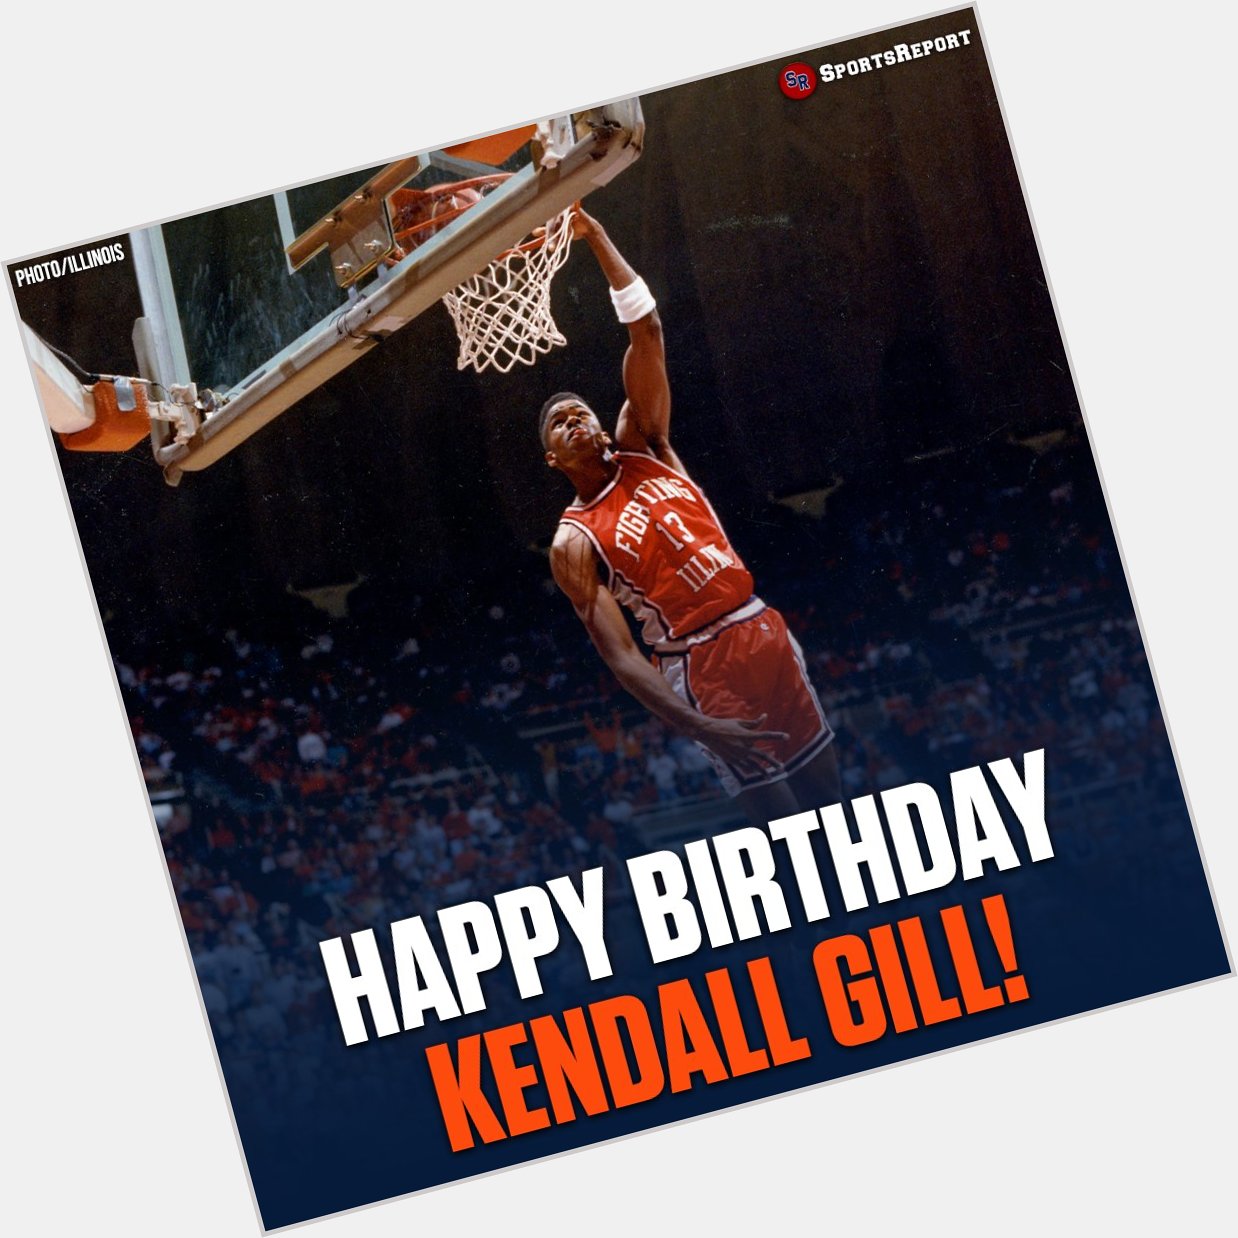  Fans, let\s wish Legend Kendall Gill a Happy Birthday! 